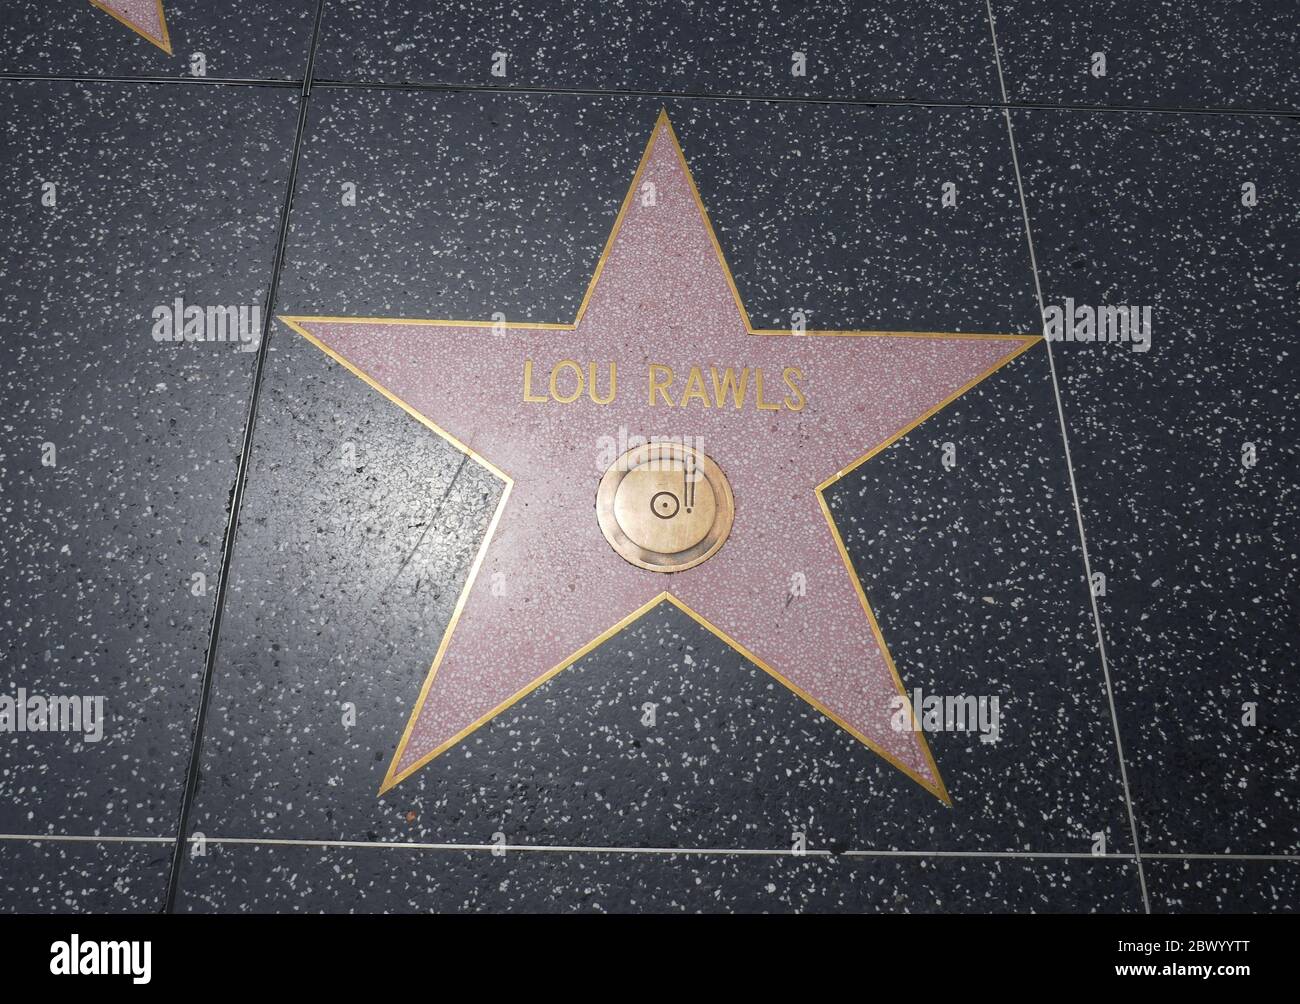 Hollywood, California, USA 2nd June 2020 A general view of atmosphere of Lou Rawls Star on Hollywood Walk of Fame on June 2, 2020 in Hollywood, California, USA. Photo by Barry King/Alamy Stock Photo Stock Photo